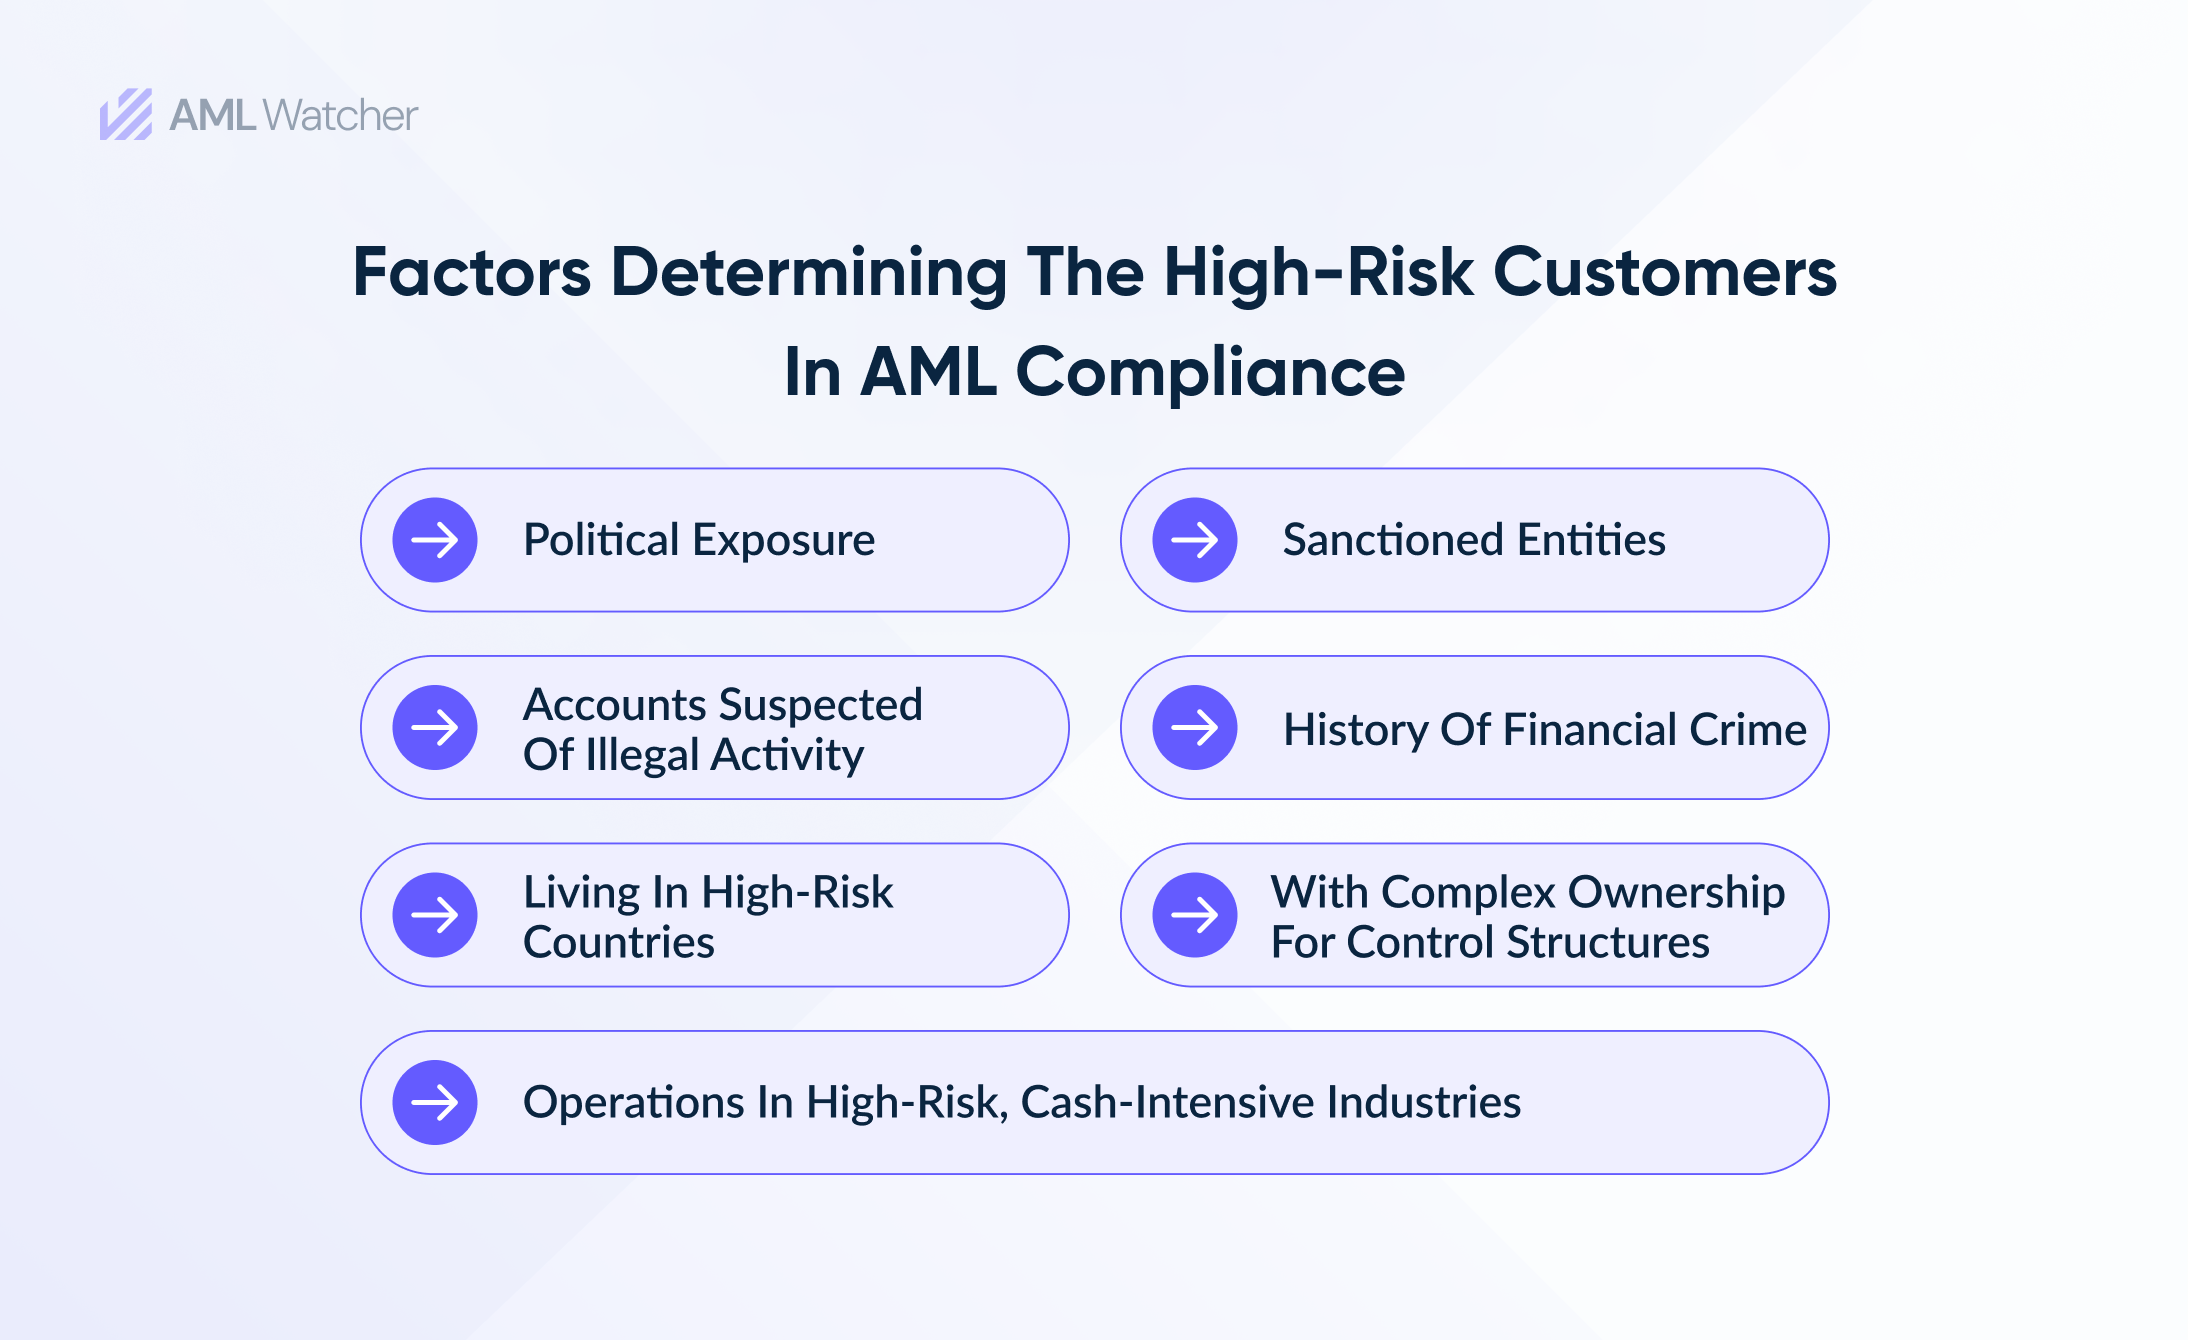 This image shows the factors determining High-risk customers in the AML compliance system. 